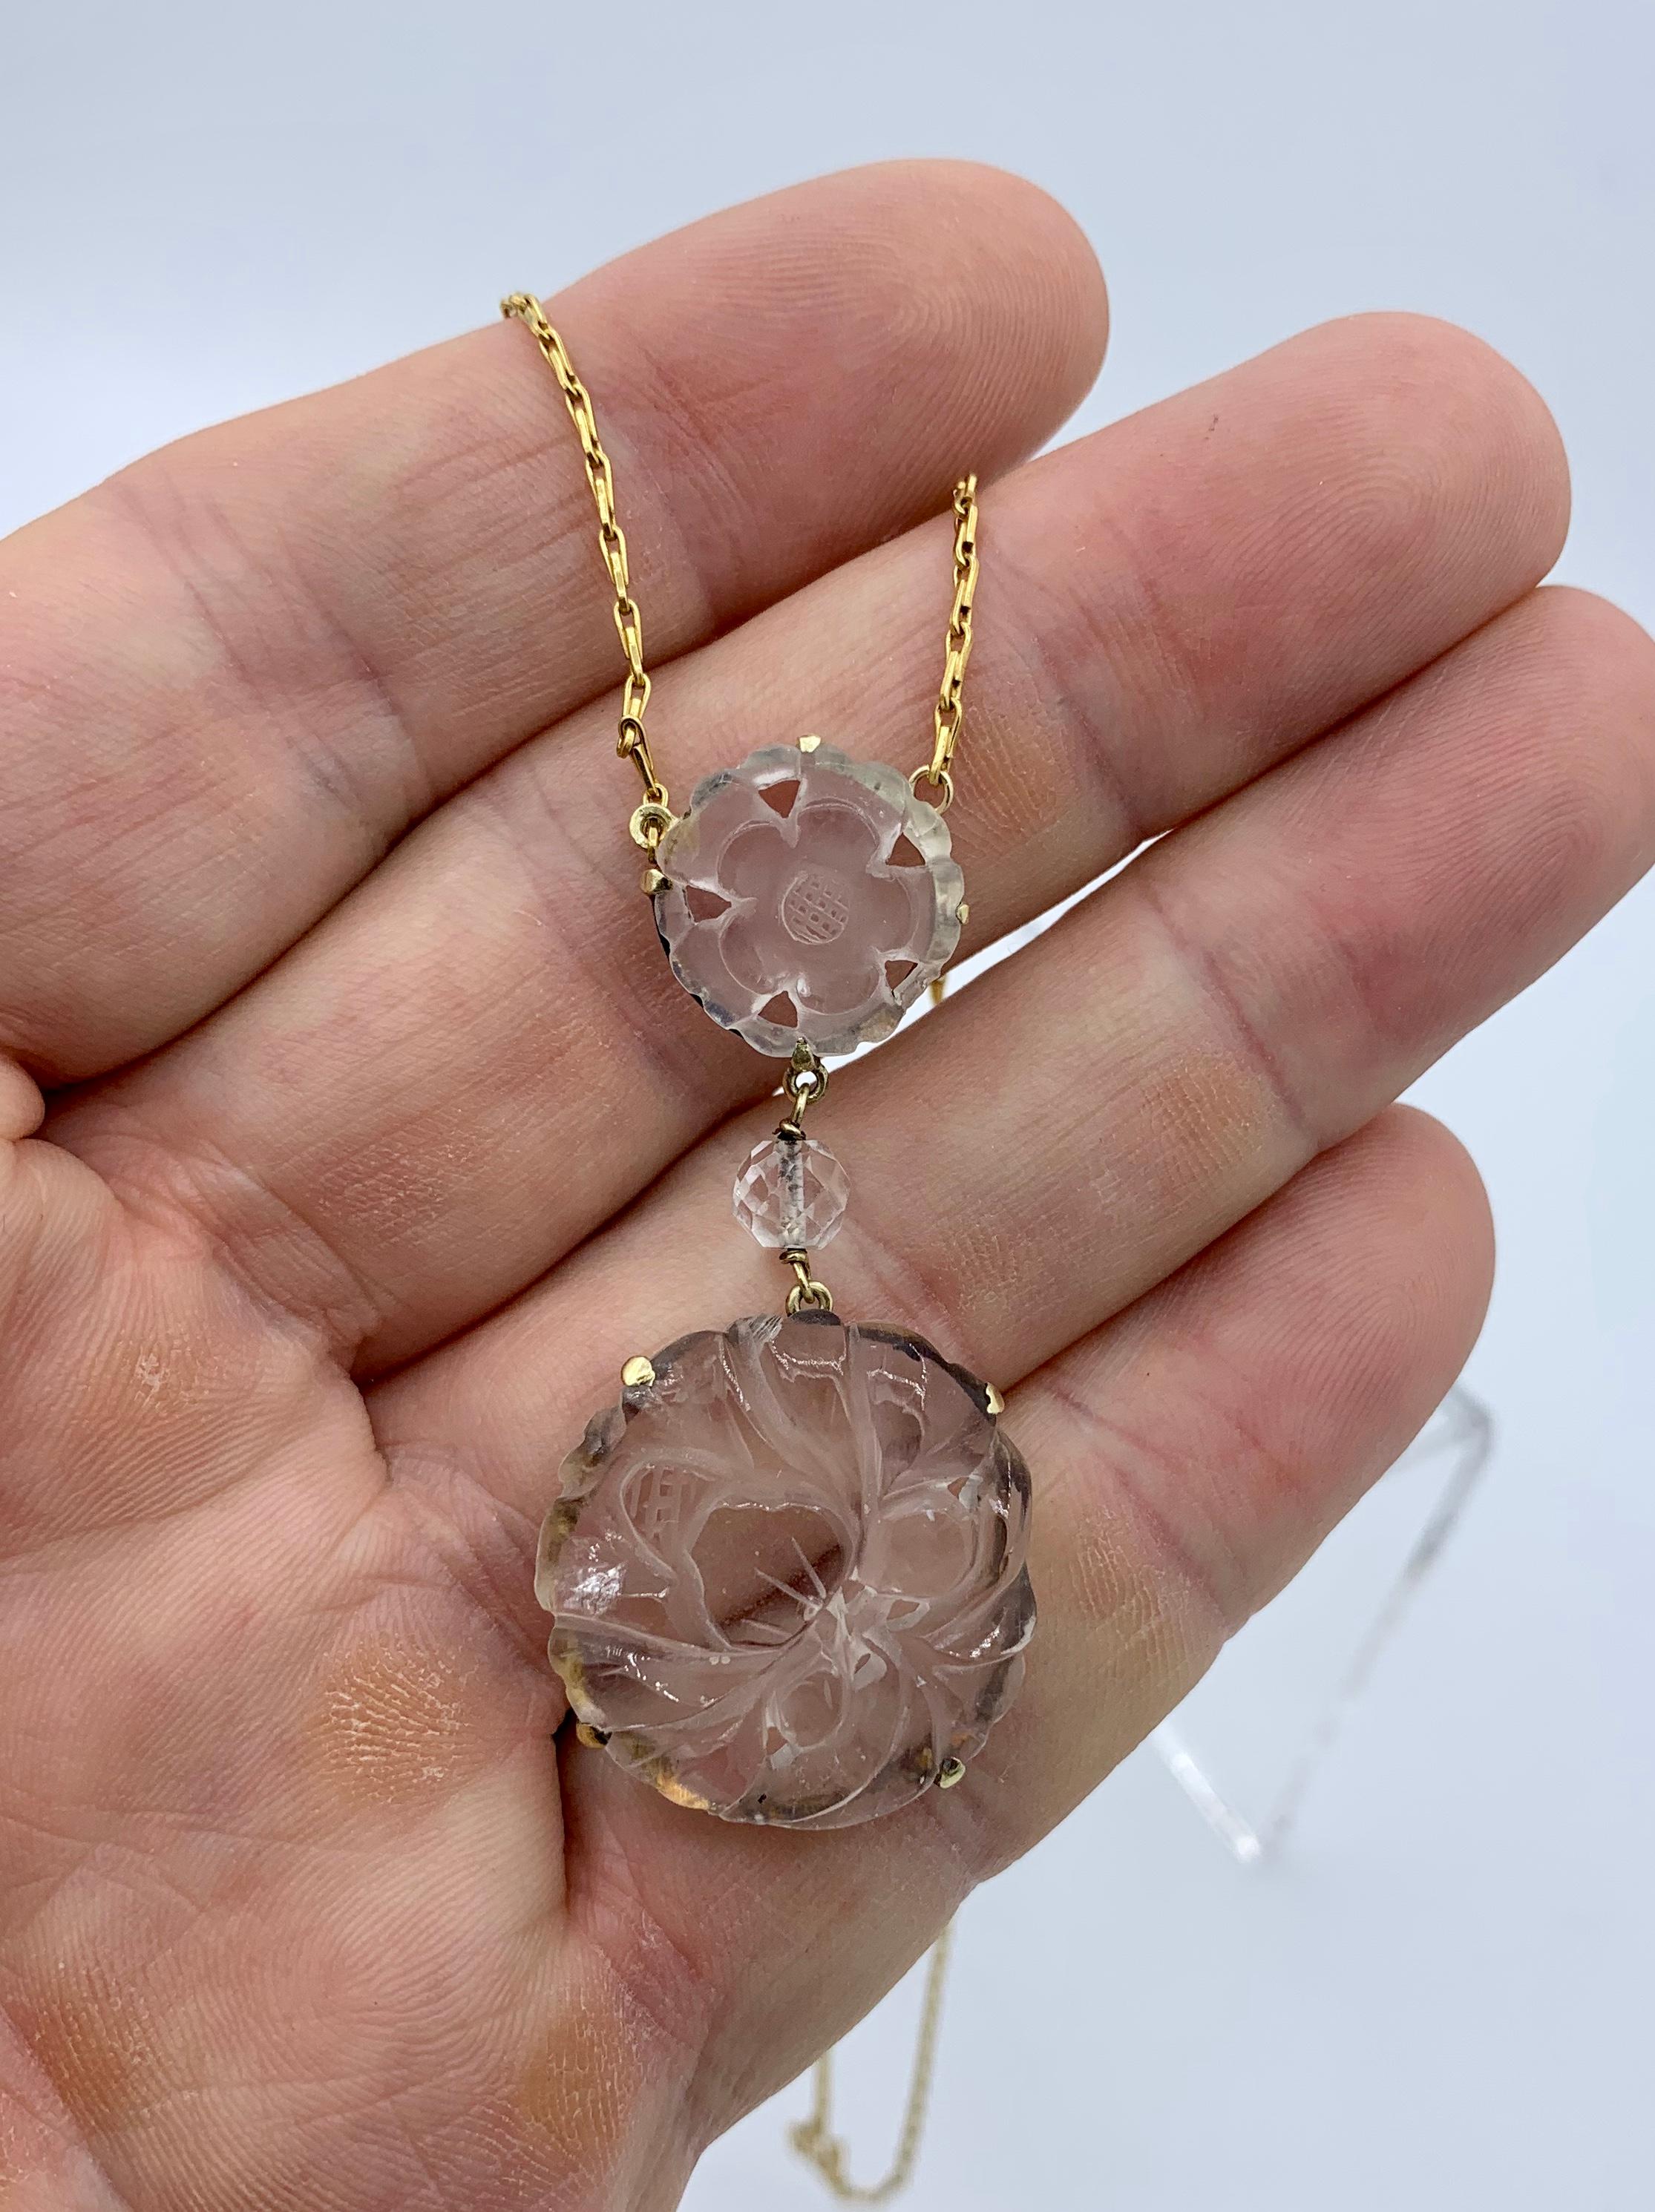 This is a stunning Carved Rock Crystal Station Necklace in 14 Karat Yellow Gold.  The rock crystal pendants are carved with a nature inspired flower and leaf motif that is just stunning.  There are faceted rock crystal bead stations within the